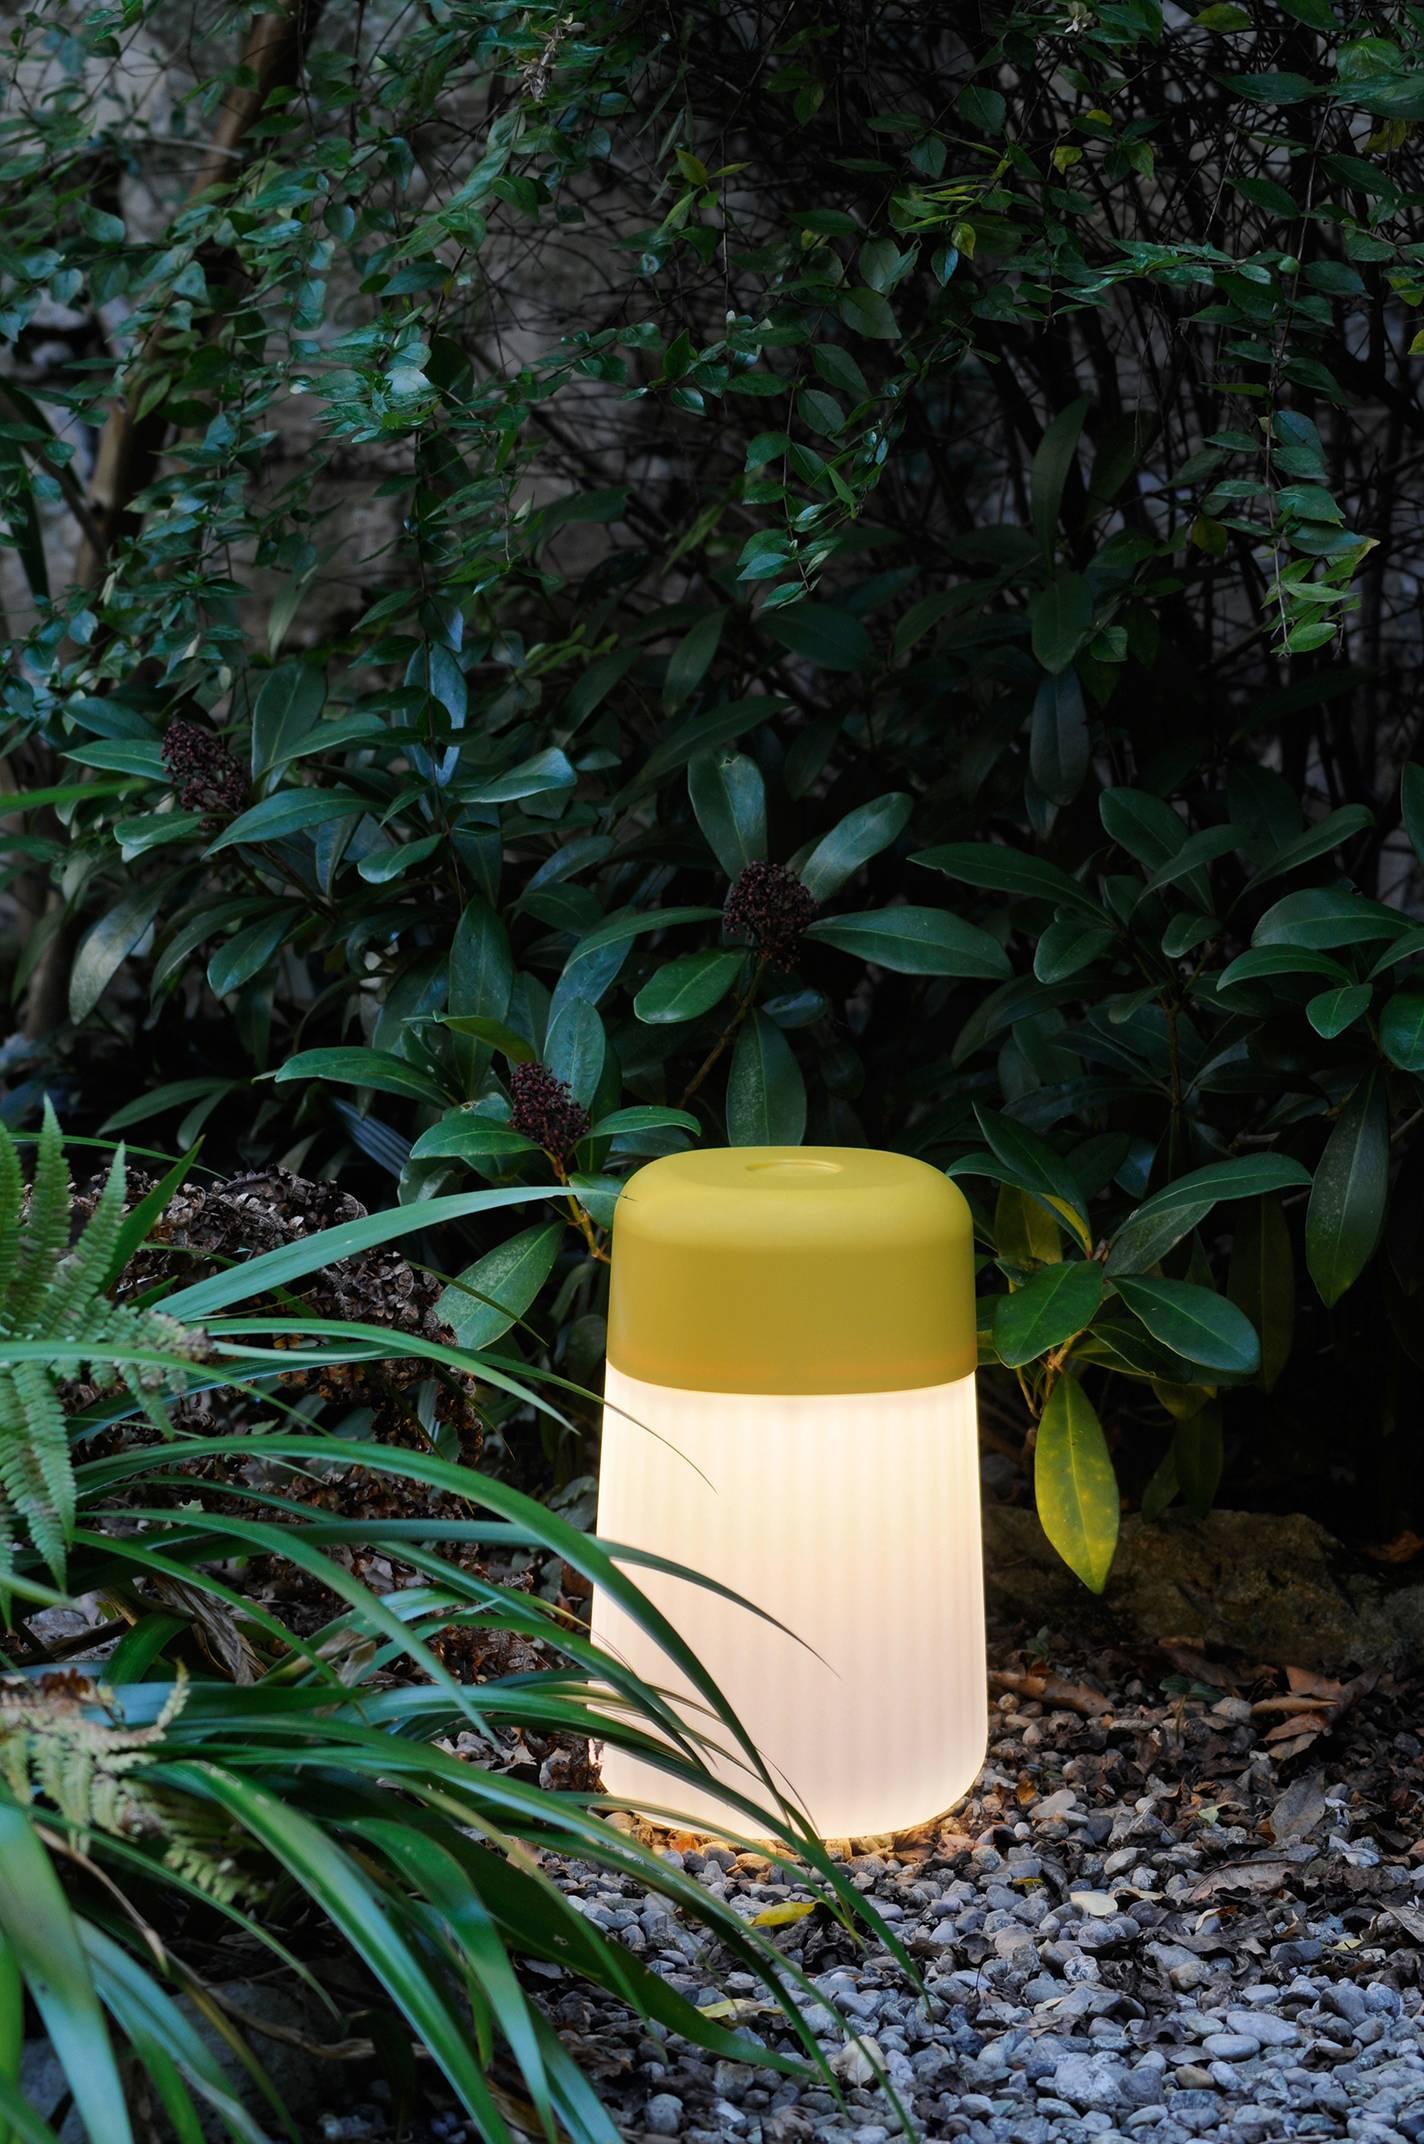 A rechargeable lamp that can easily be moved and placed exactly where
light is needed, with no cables to get in the way. It has a lid, which comes in three different colors and holds the light source. Up to seven hours of autonomy.

Outdoor lamp,